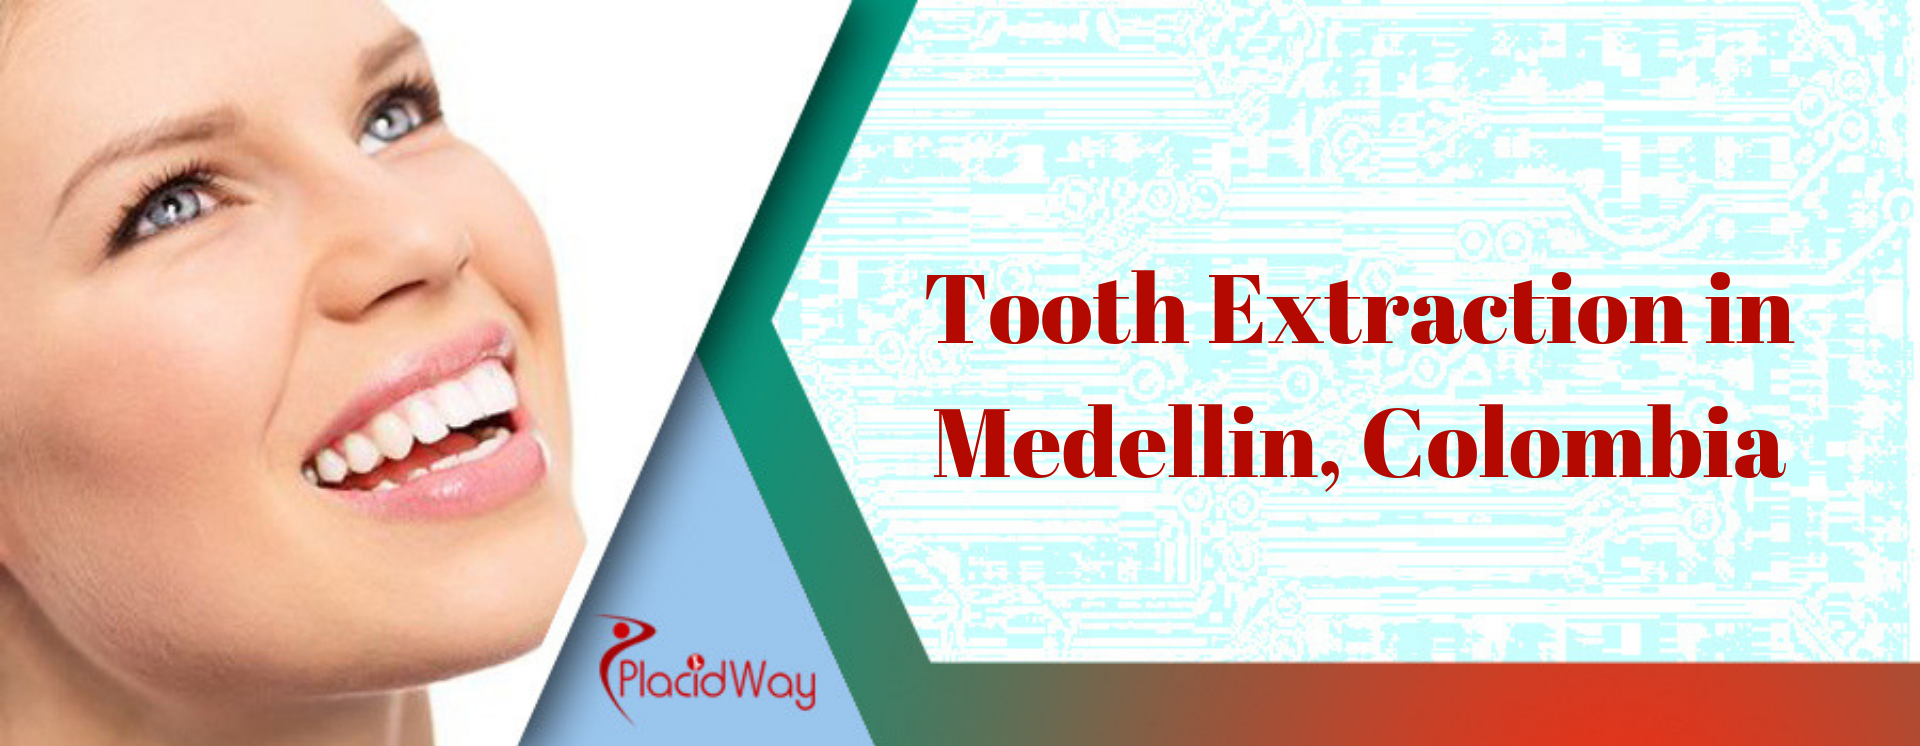 Tooth Extraction in Medellin, Colombia